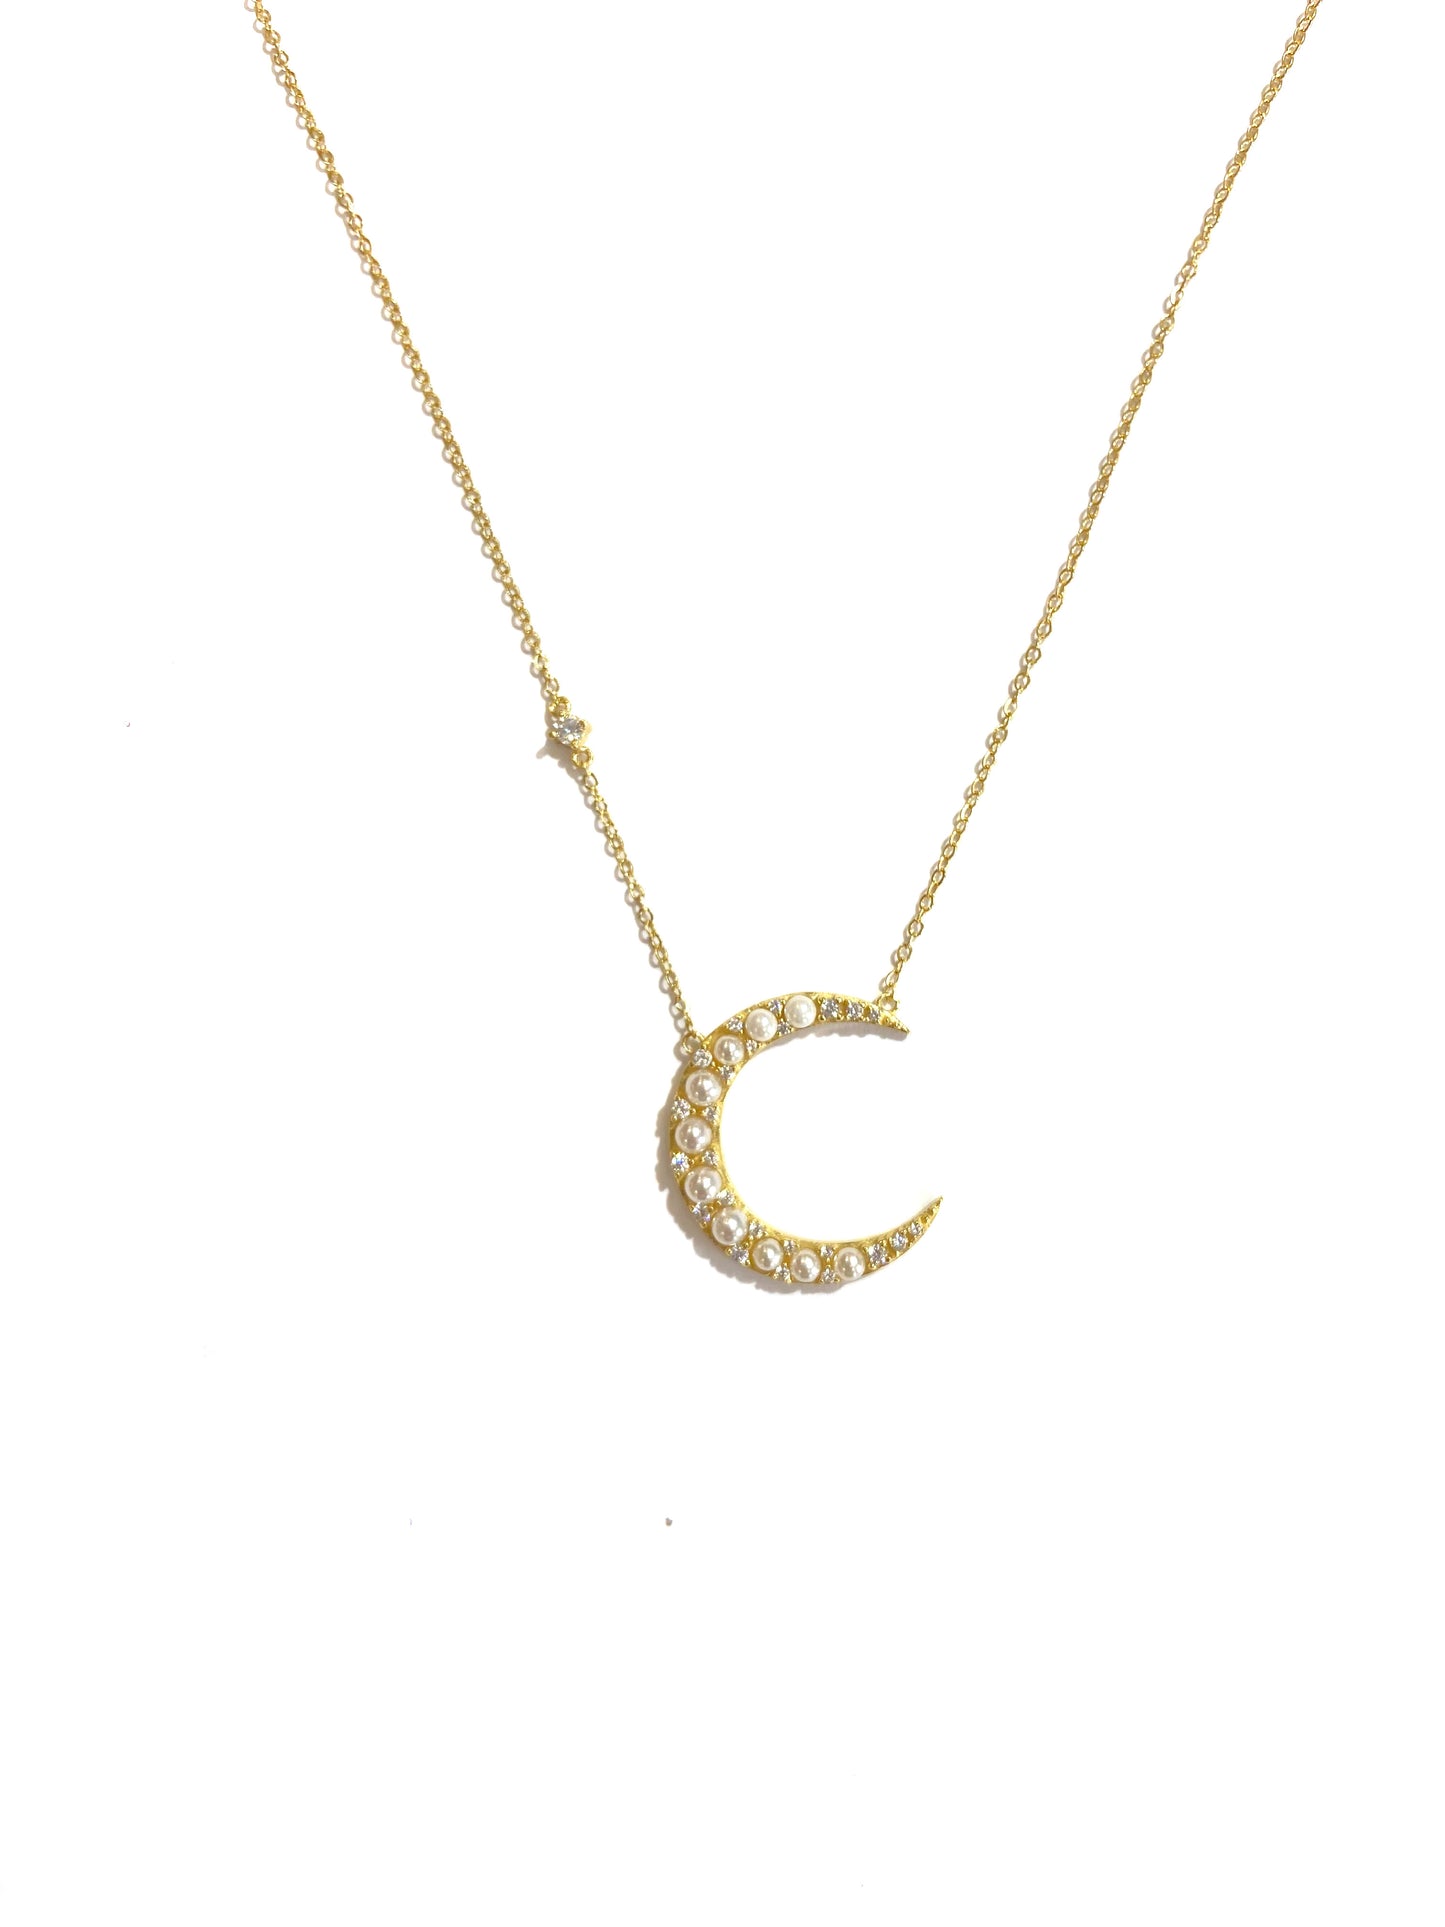 Peal Crescent Moon with Pearls Necklace